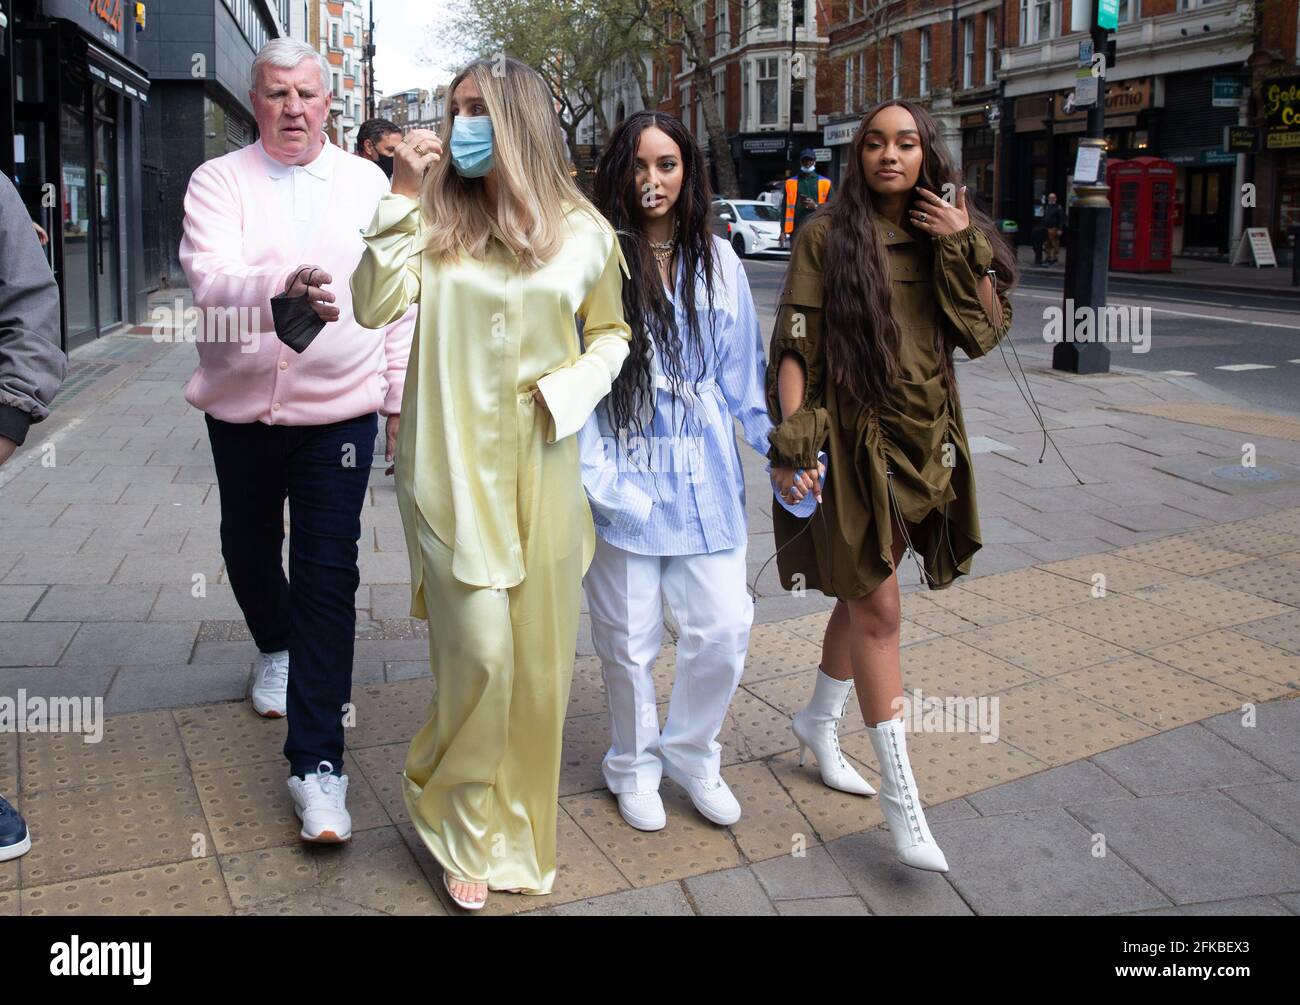 London, UK. 30th April 2021. Little Mix, Perrie Edwards, Jade Thirlwall and Leigh-Anne Pinnock, leave the studios of Global Radio in Leicester Square. Credit: Tommy London/Alamy Live News Stock Photo